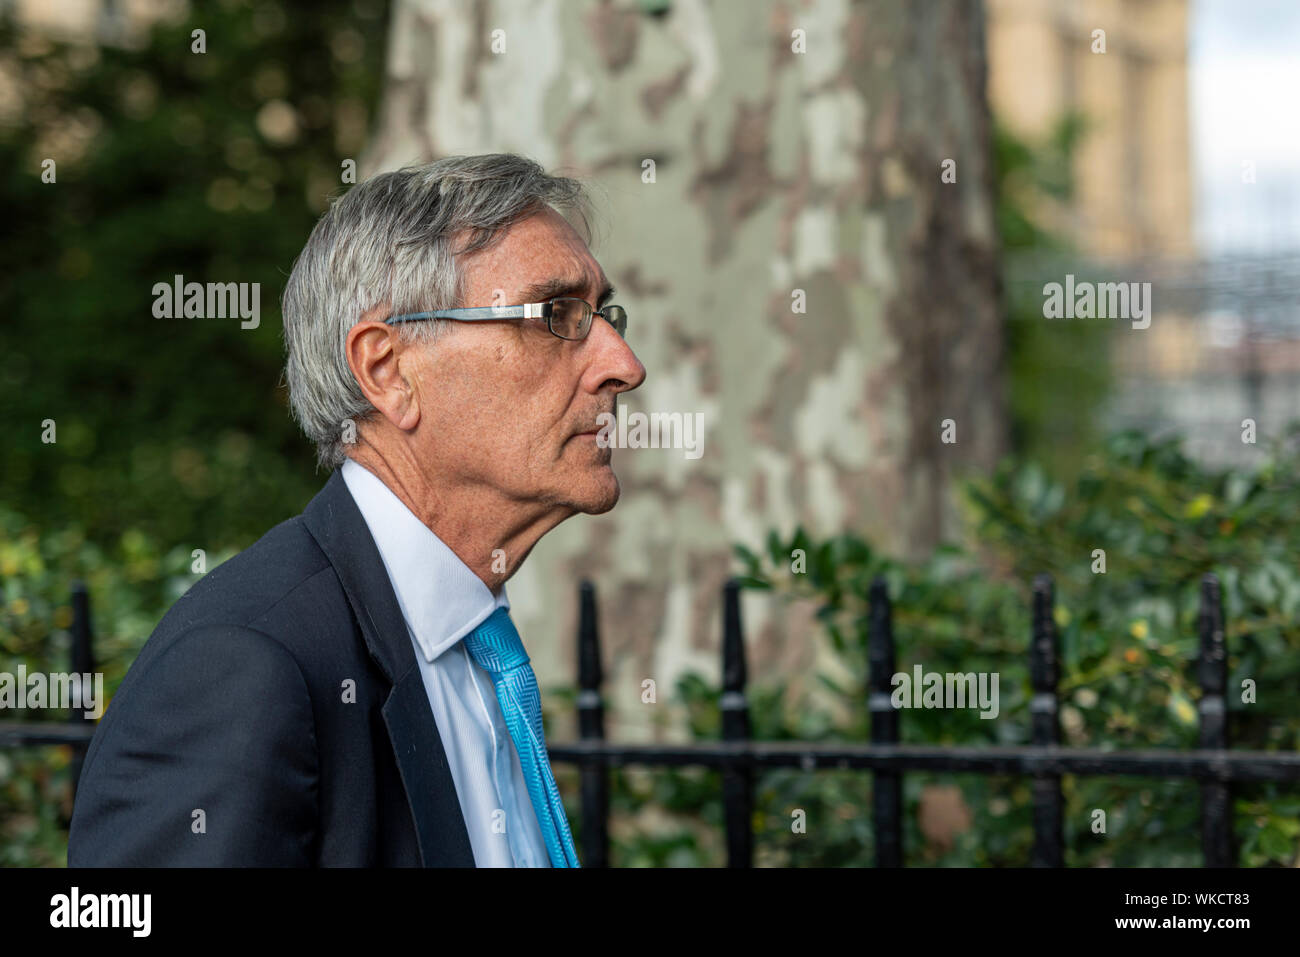 Sir John Redwood MP outside Parliament as government resumed after summer recess debating No Deal Brexit and prorogue Stock Photo